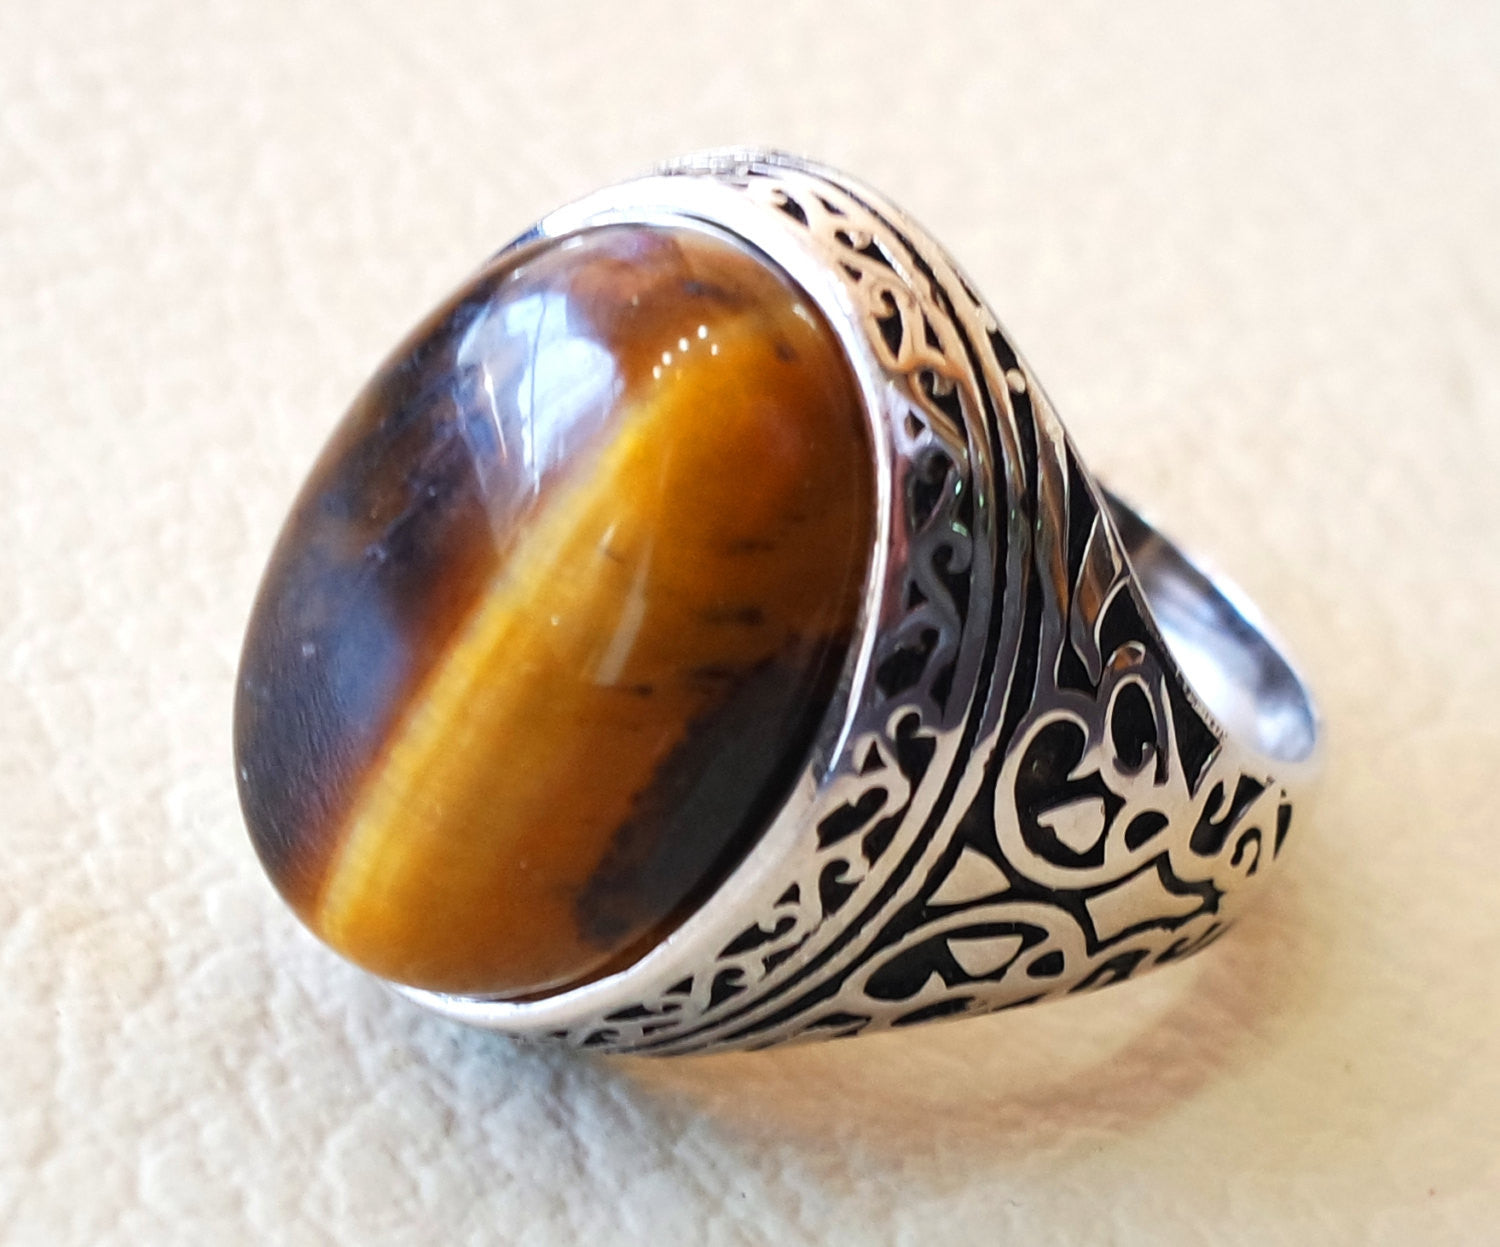 men ring sterling silver 925 cat eye tiger eye semi precious natural cabochon stone any size ottoman turkish middle eastern arabic jewelry